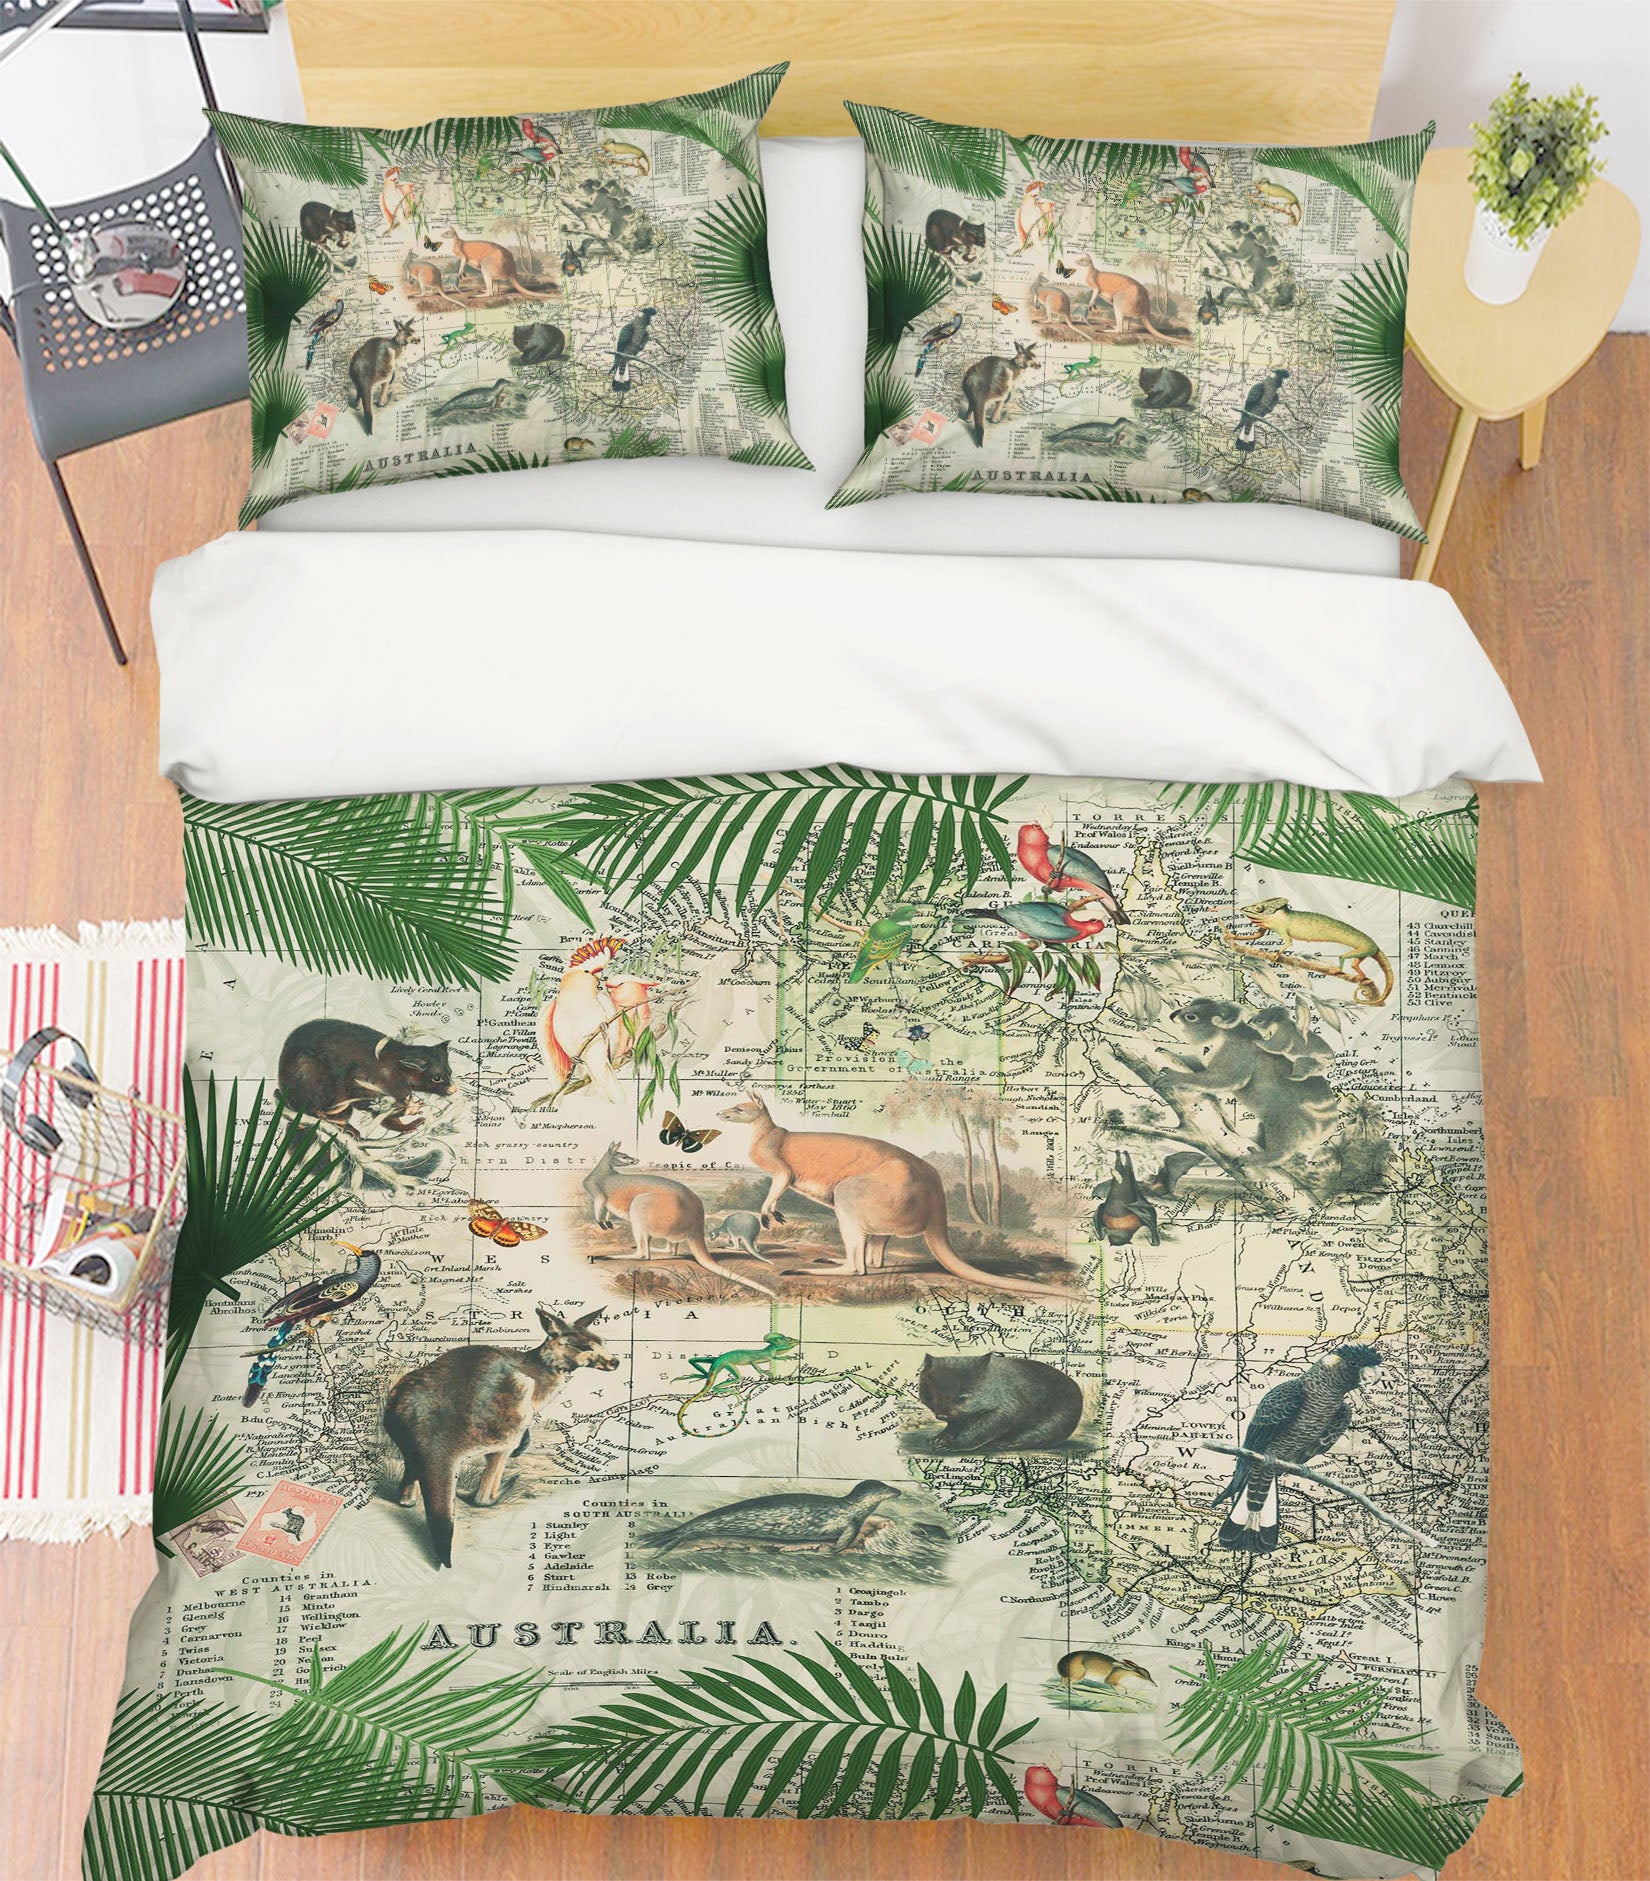 3D Cute Kangaroo 101 Andrea haase Bedding Bed Pillowcases Quilt